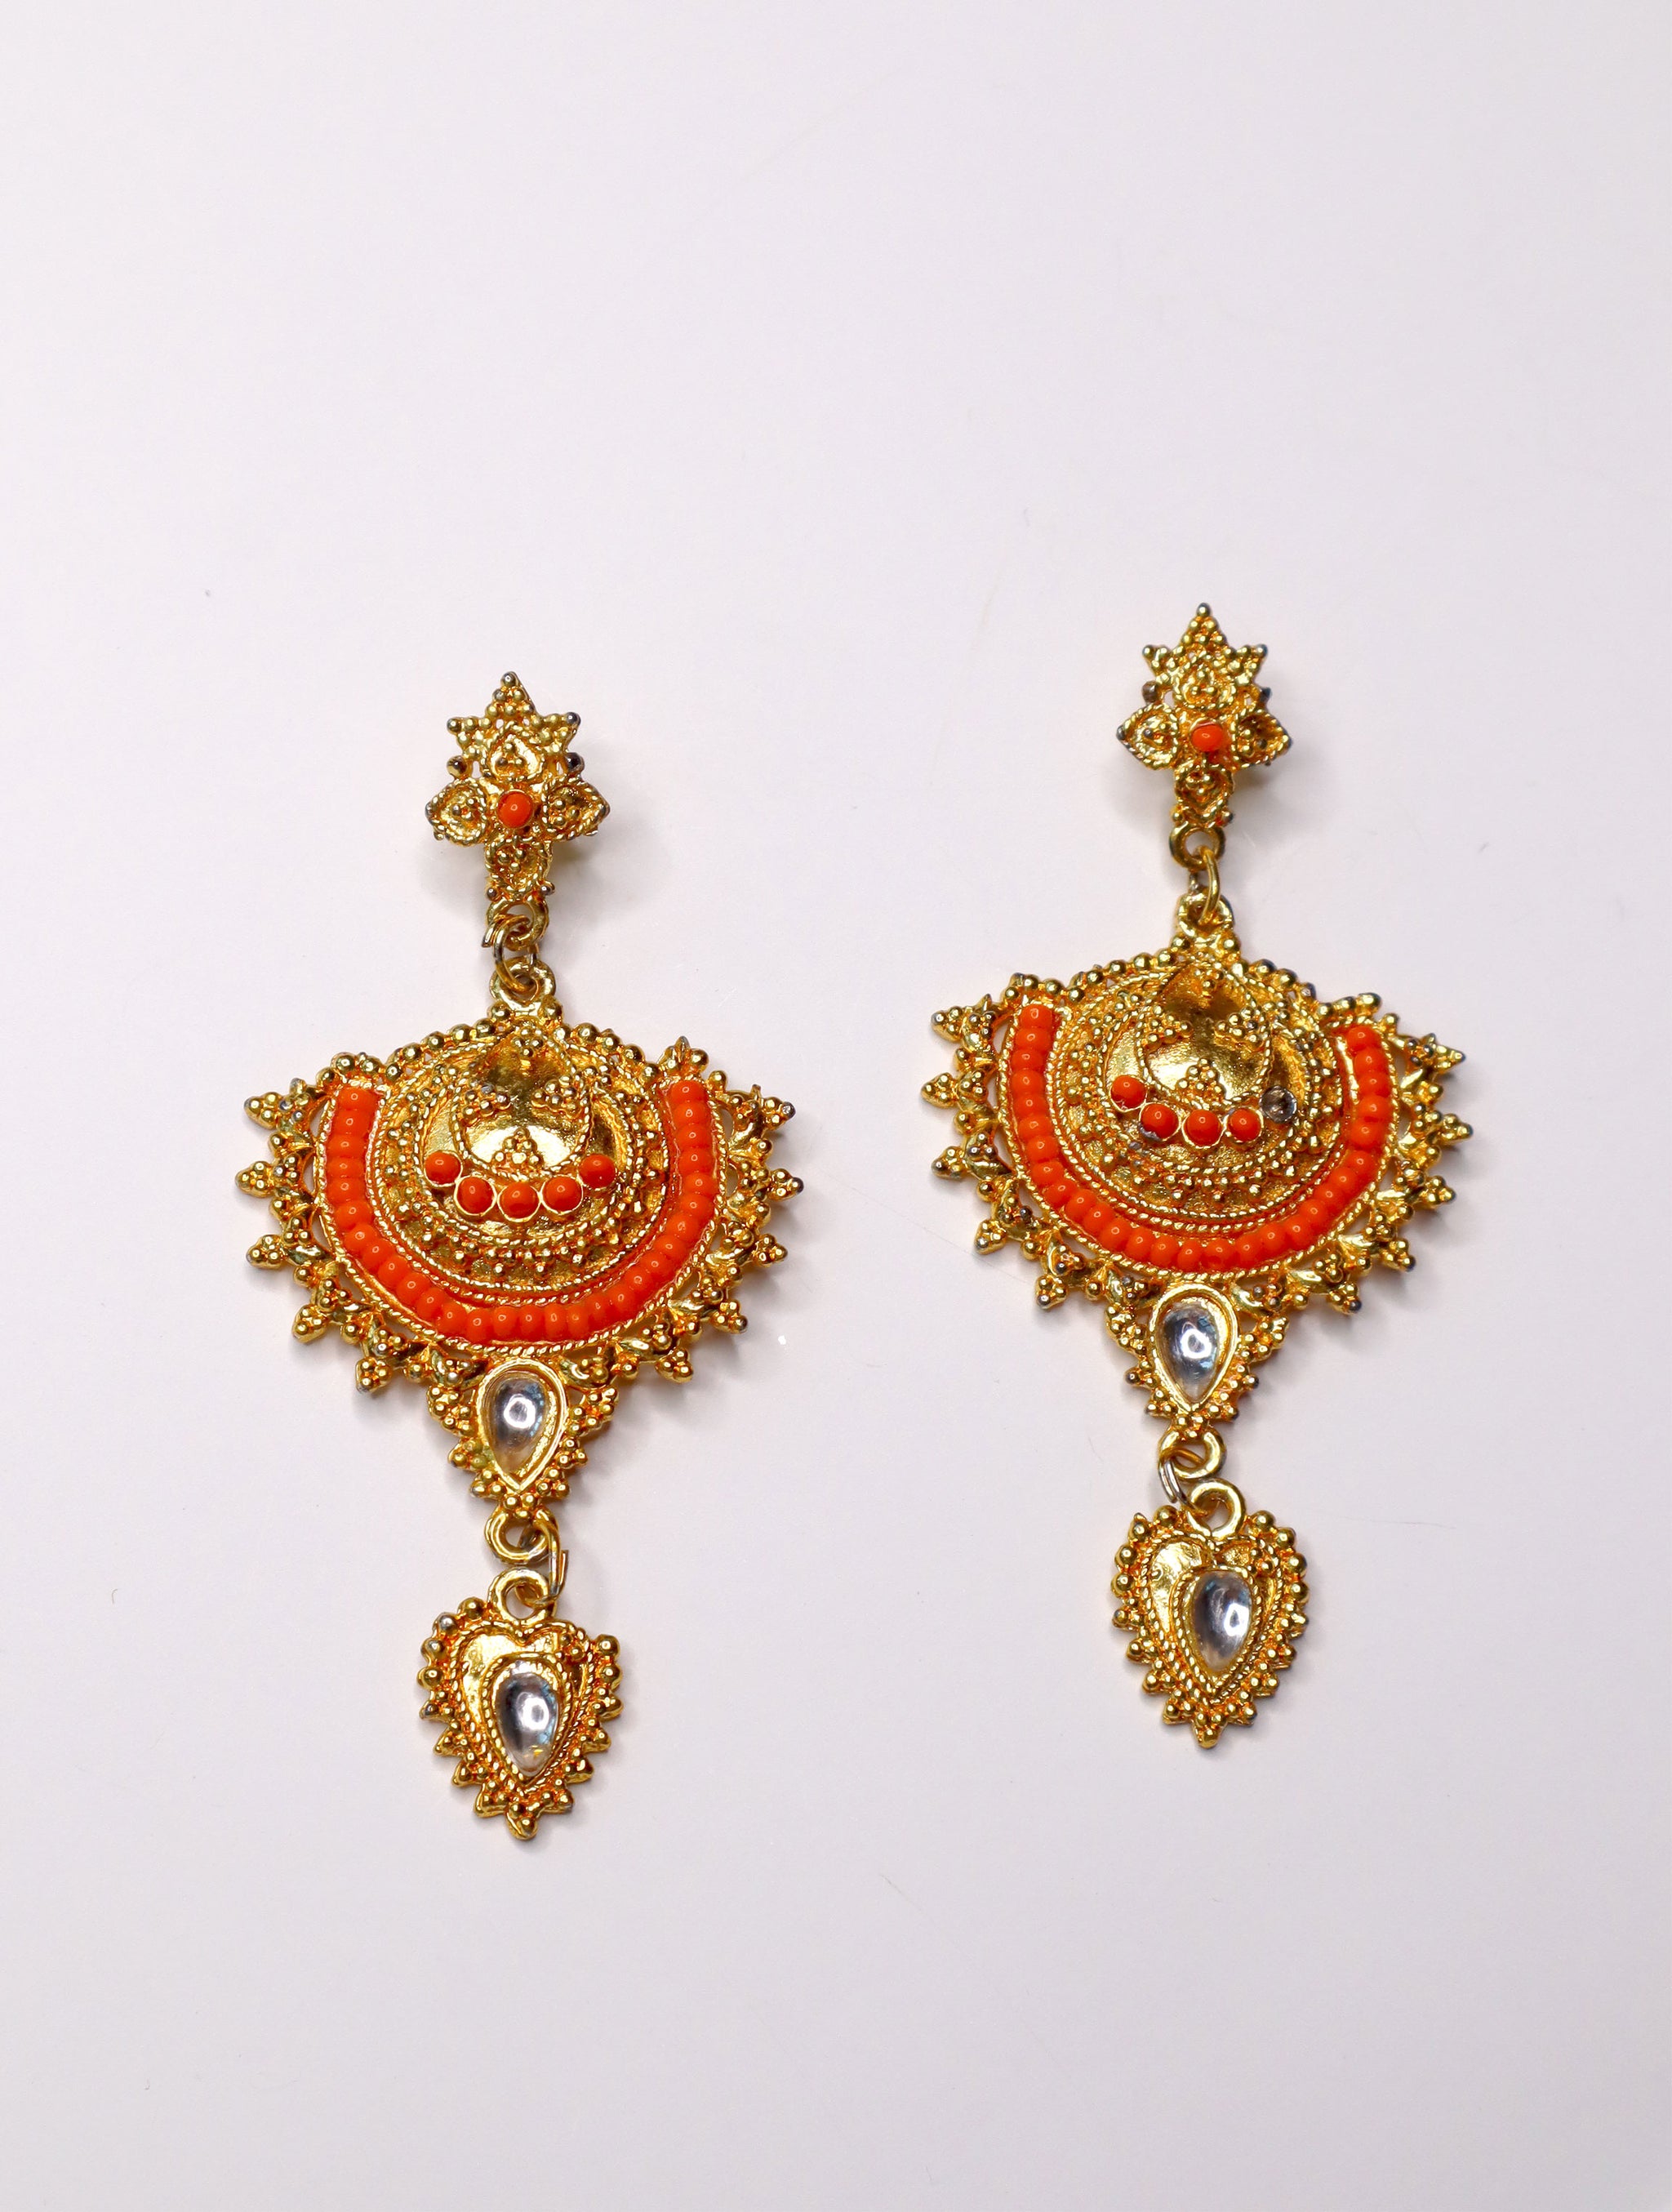 Discover 123+ orange traditional earrings